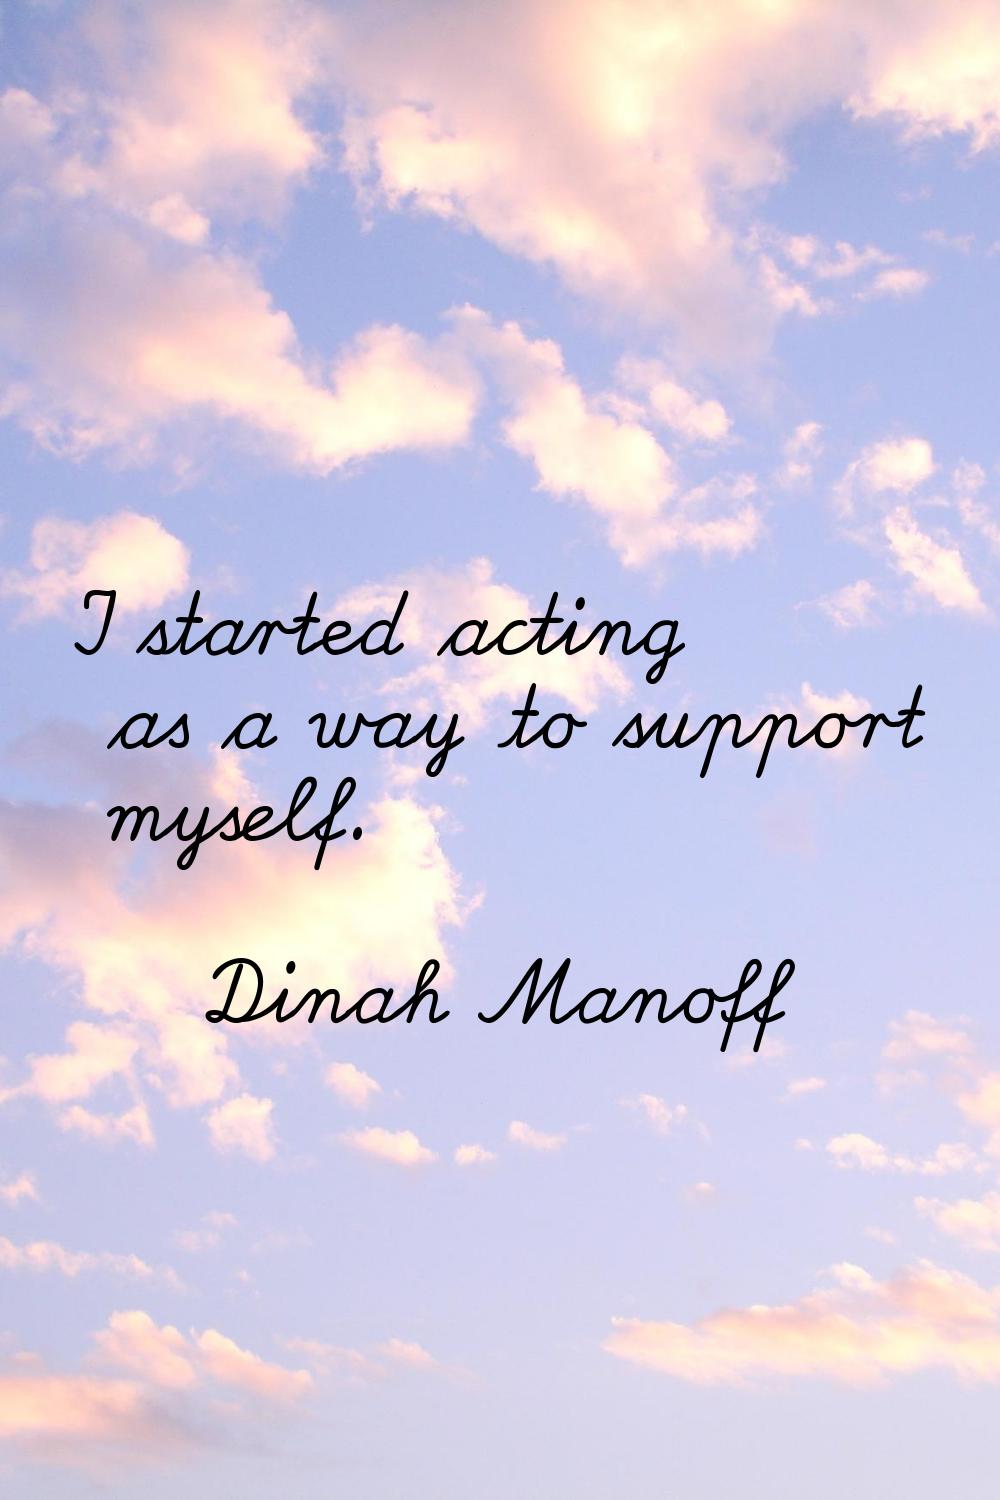 I started acting as a way to support myself.